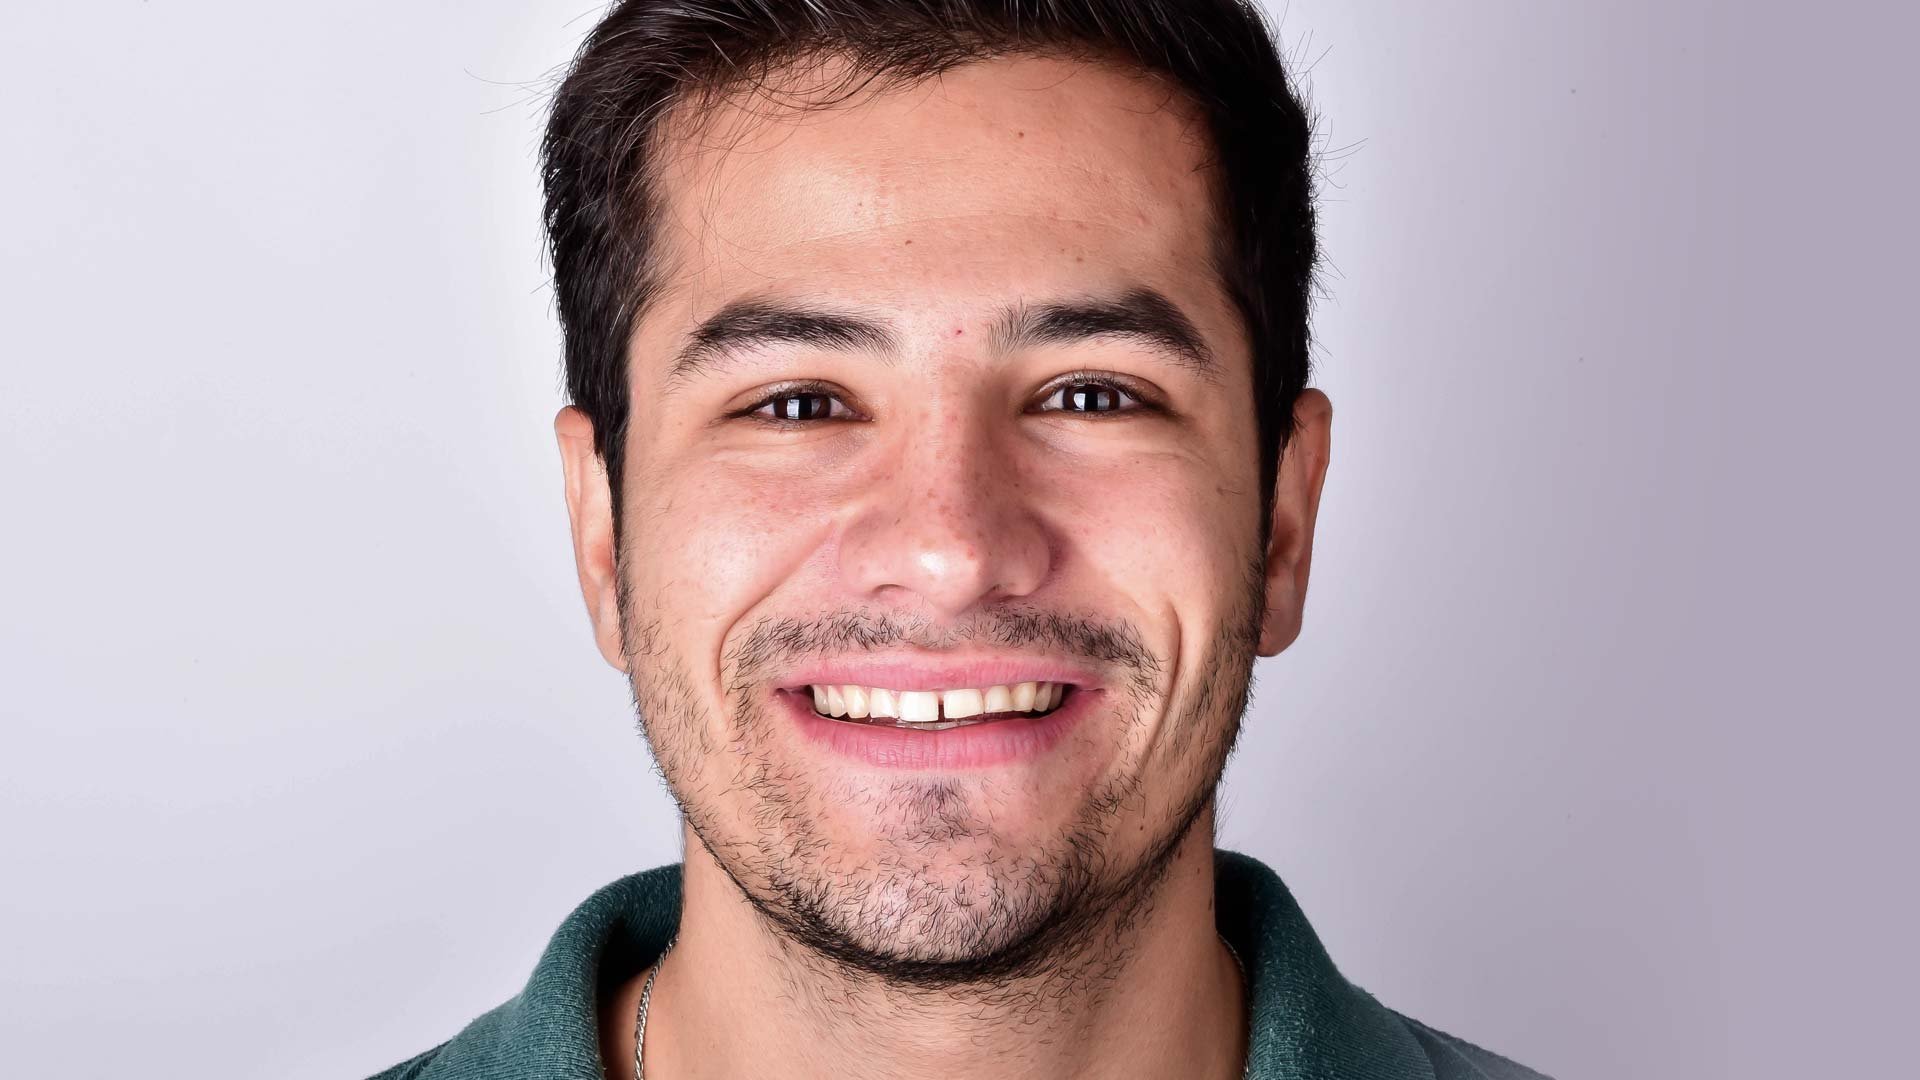 A young man smiling to show his teeth before his dental treatment with Digital Smile Design.